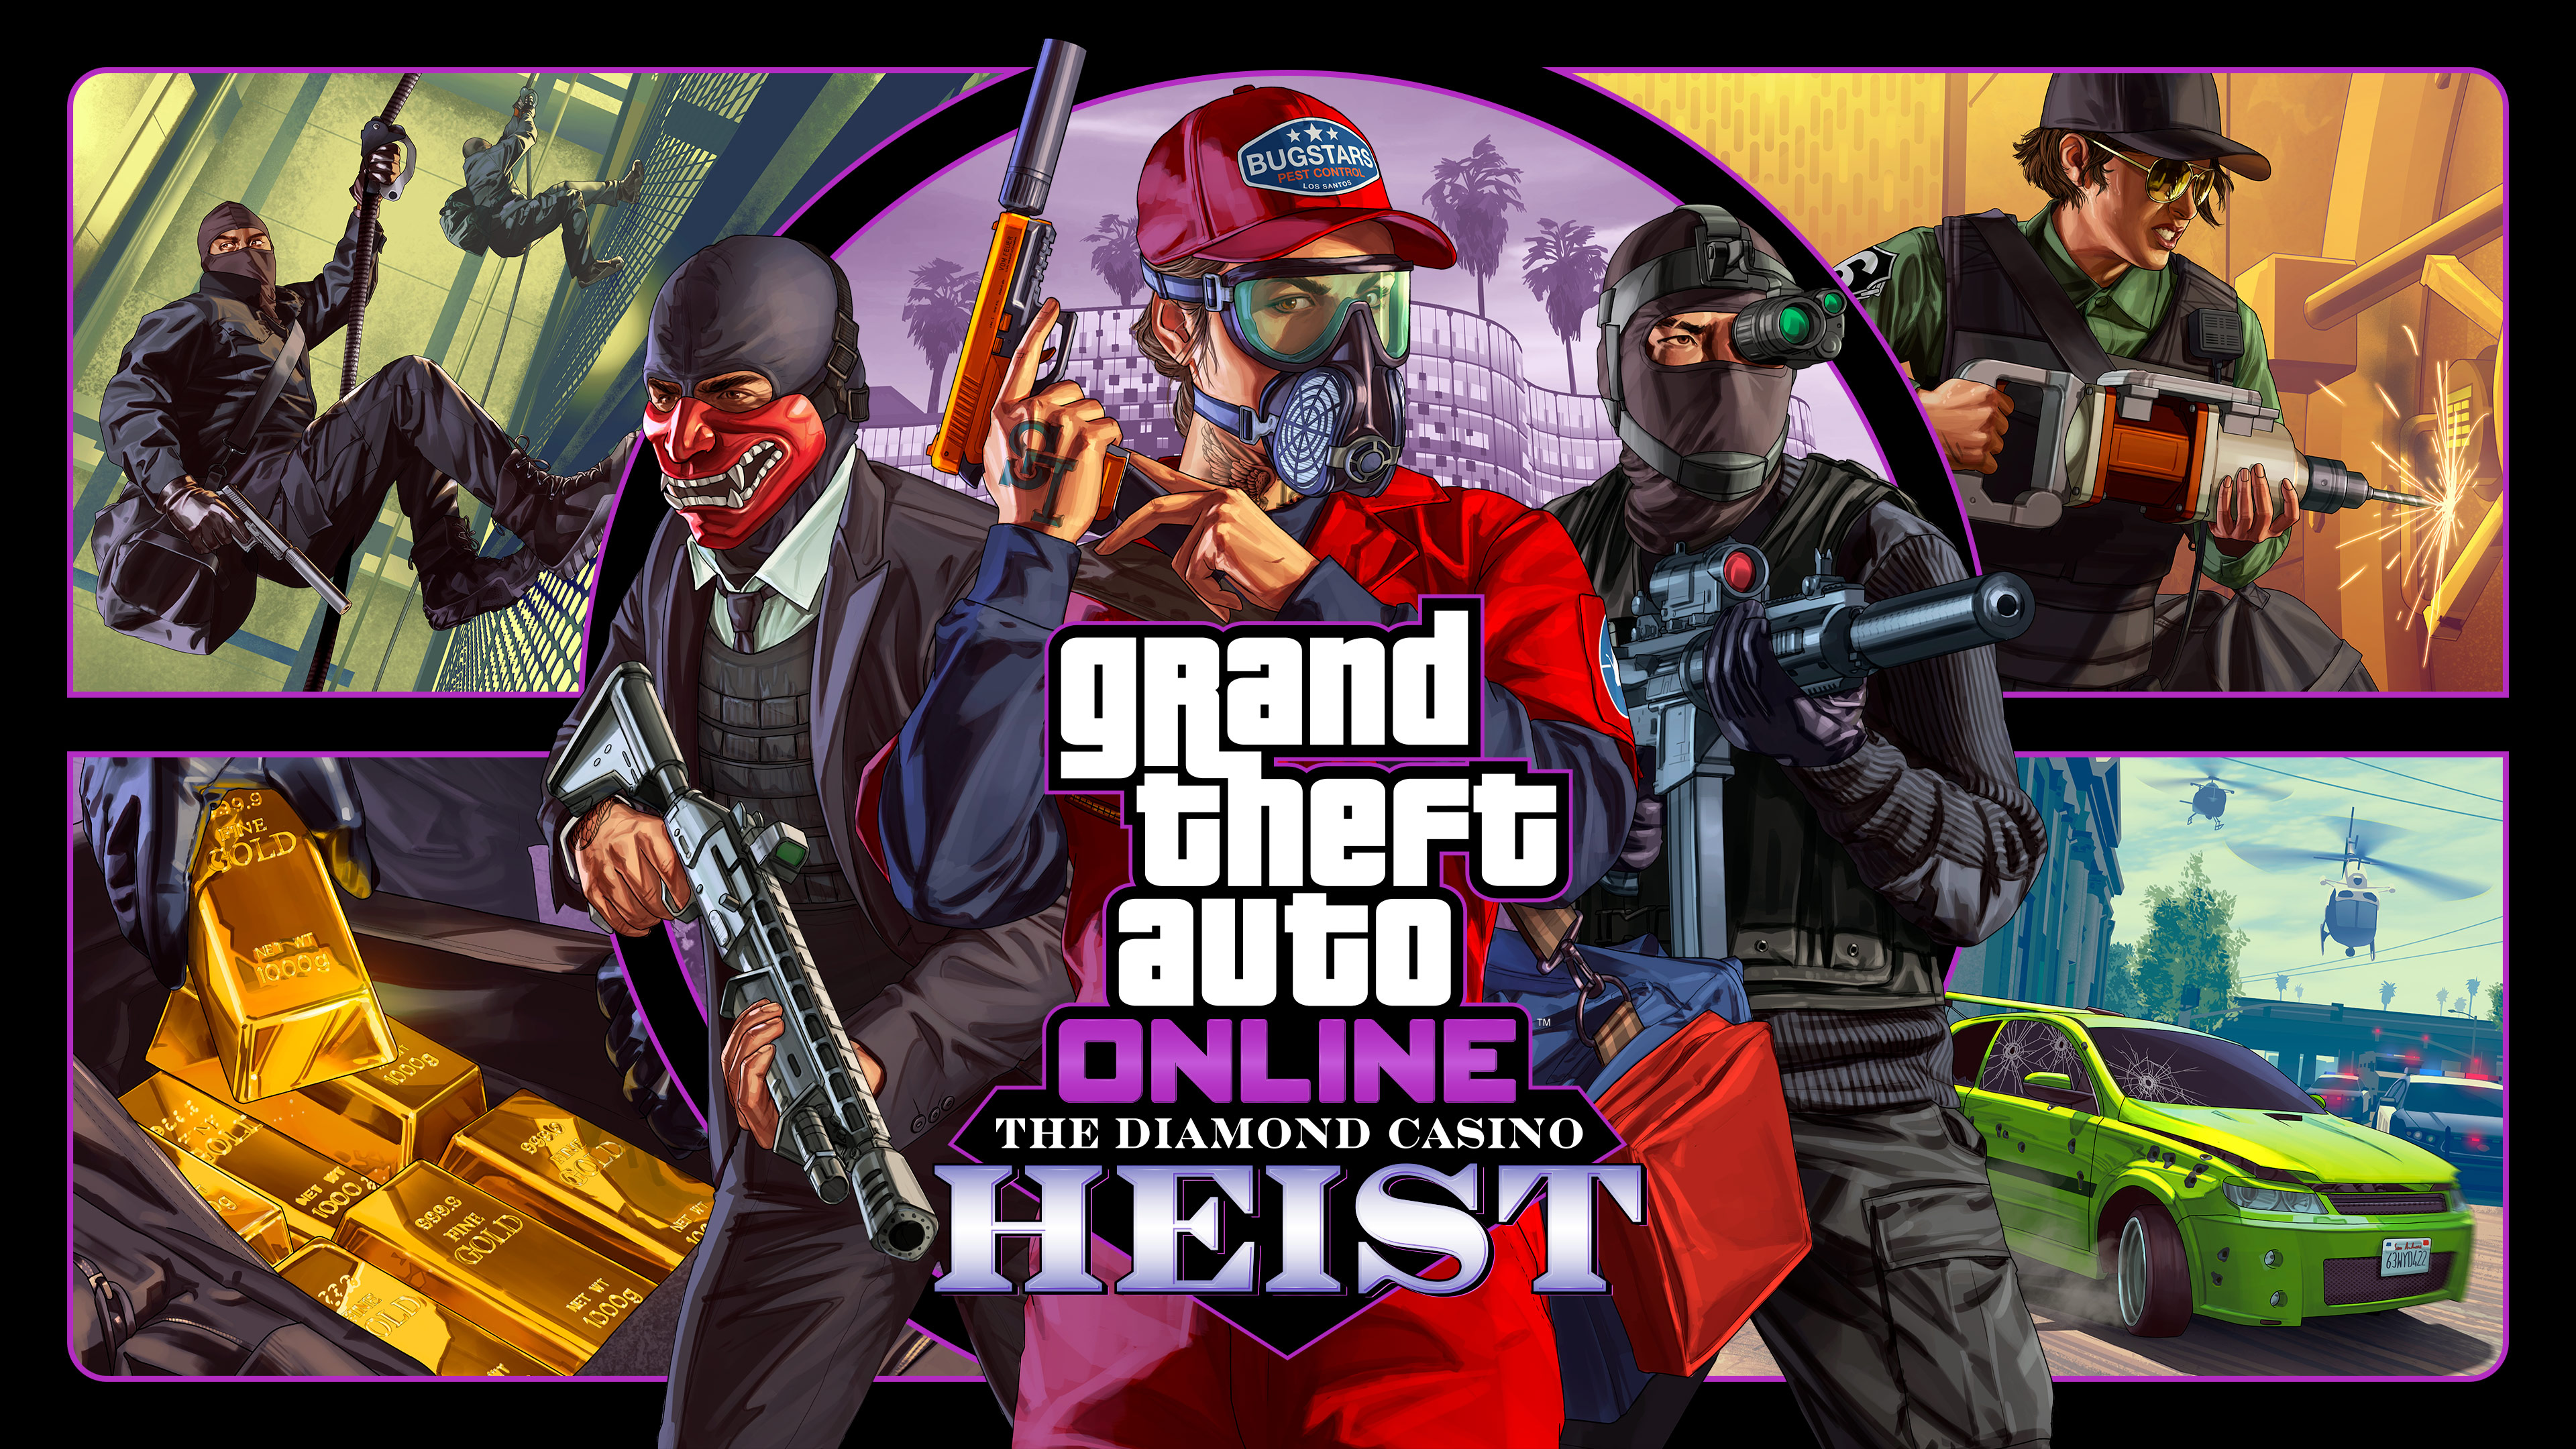 Gta online diamond casino heist hd papers and backgrounds